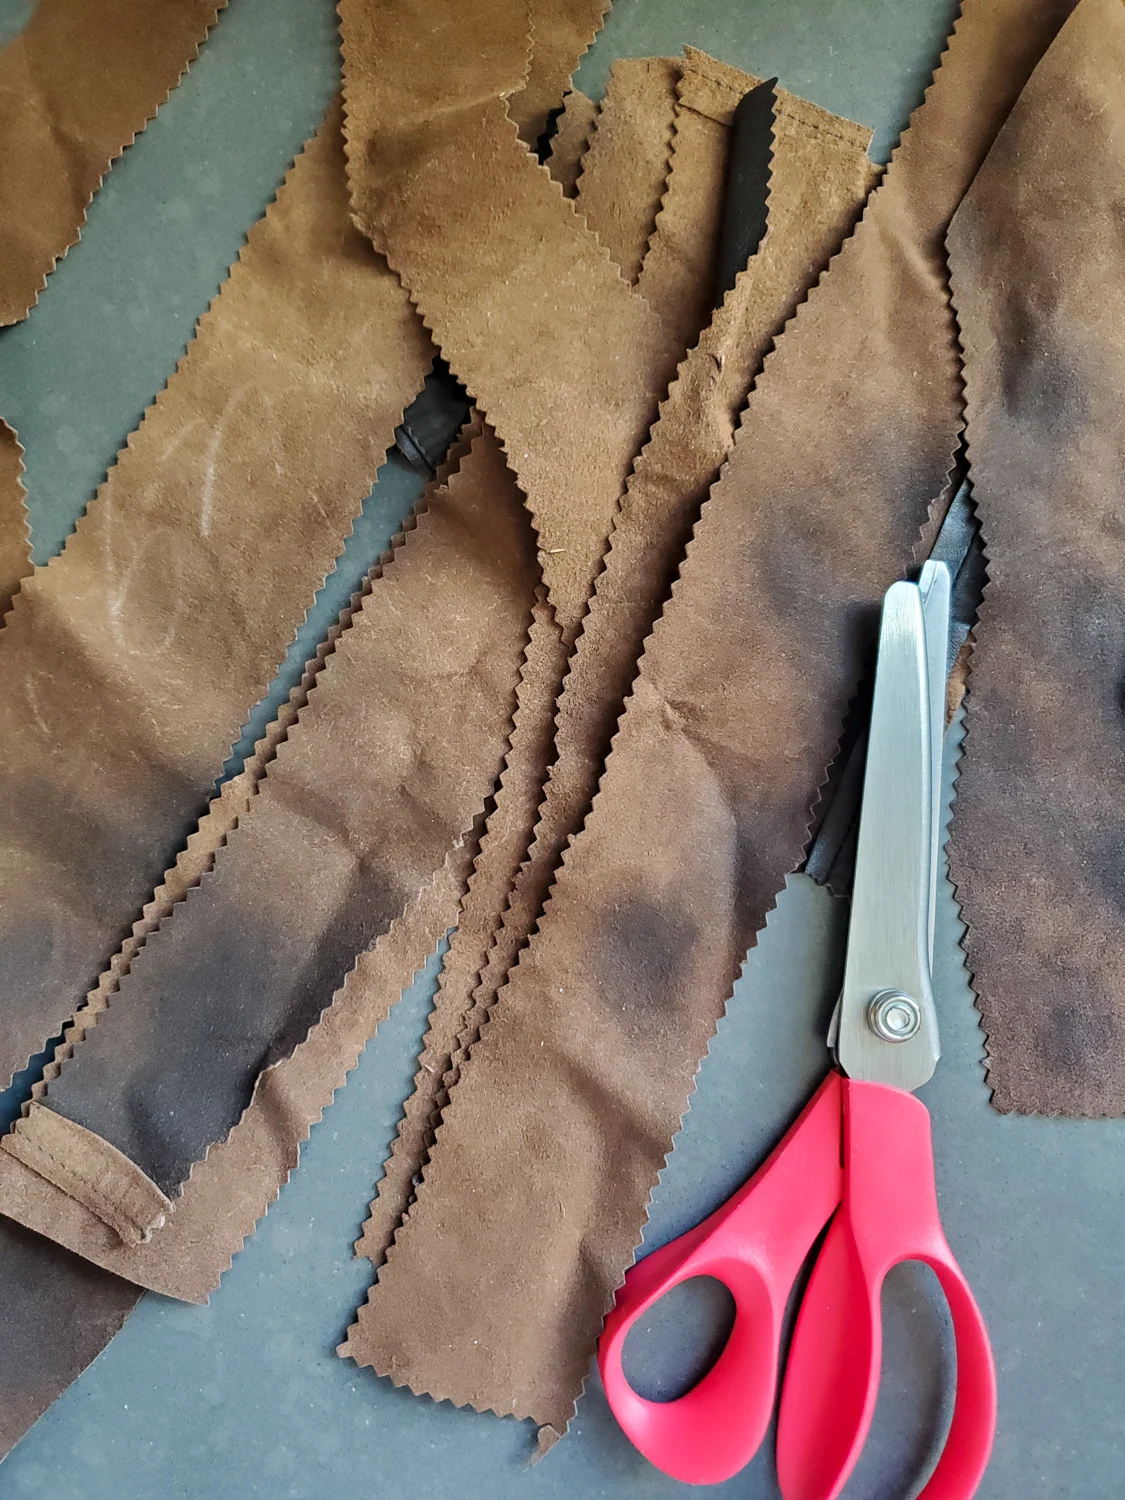 cut strips of leather with shearing scissors